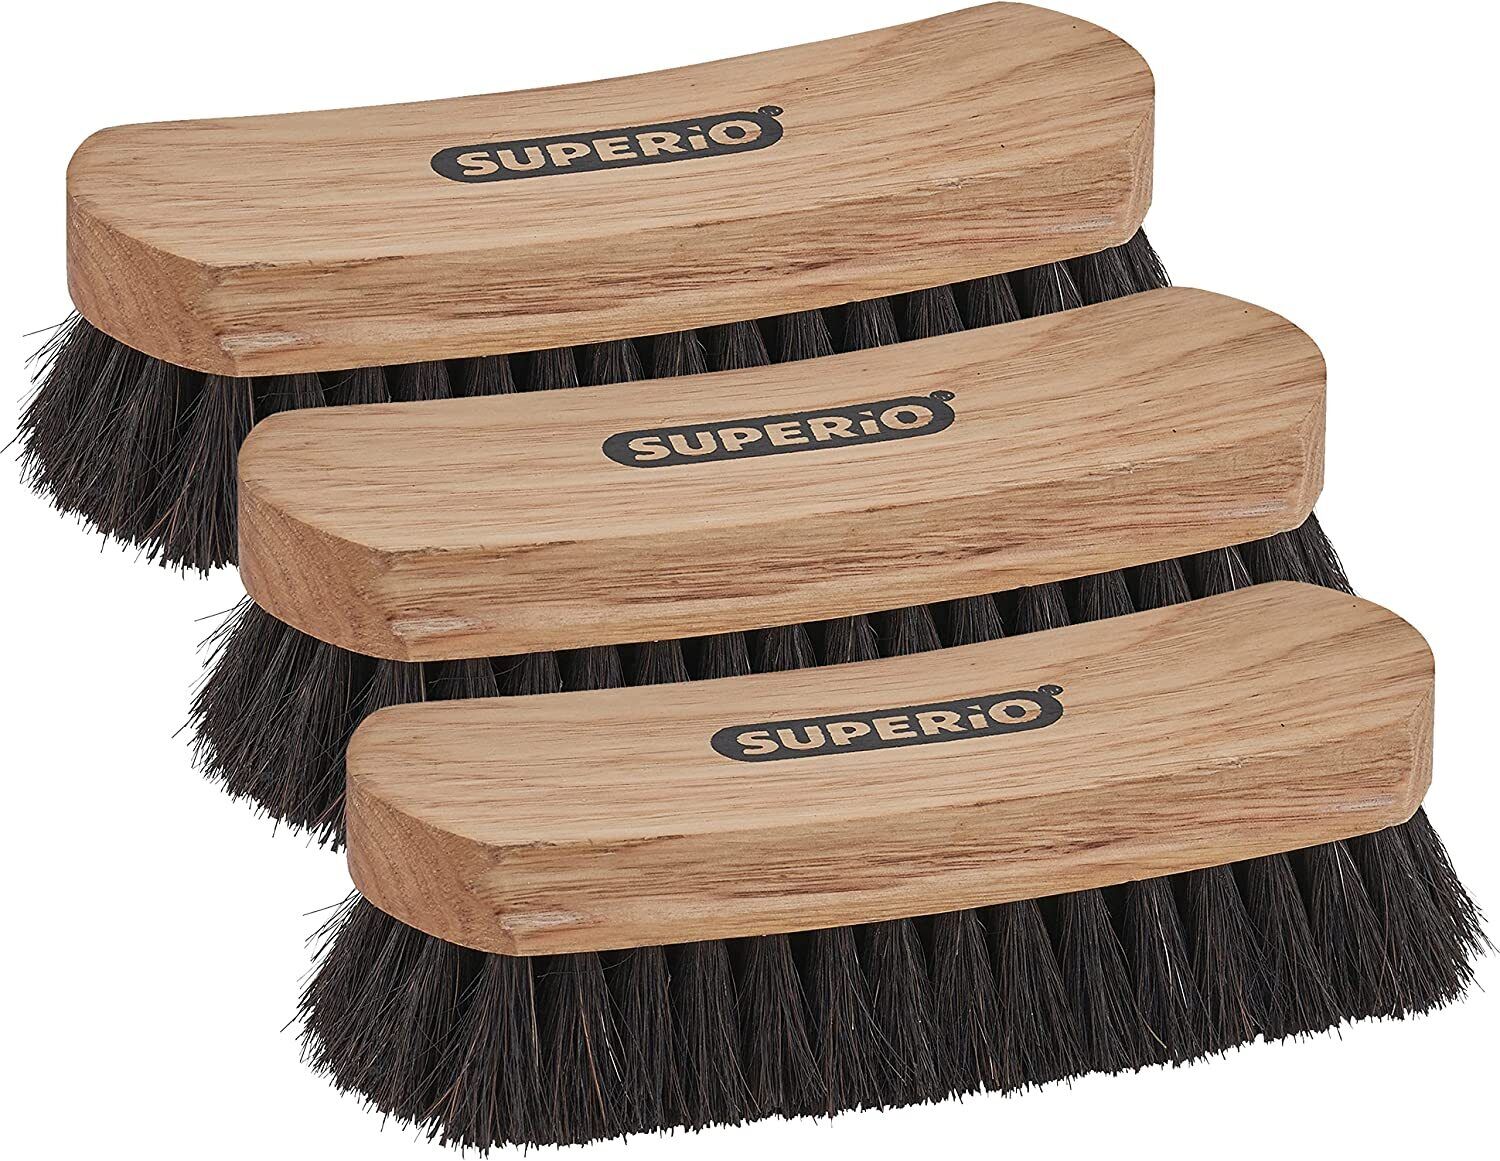 Superio Horsehair Shoe Brush With 7” Concave Wood Handle, Comfort Grip - 3 Pack